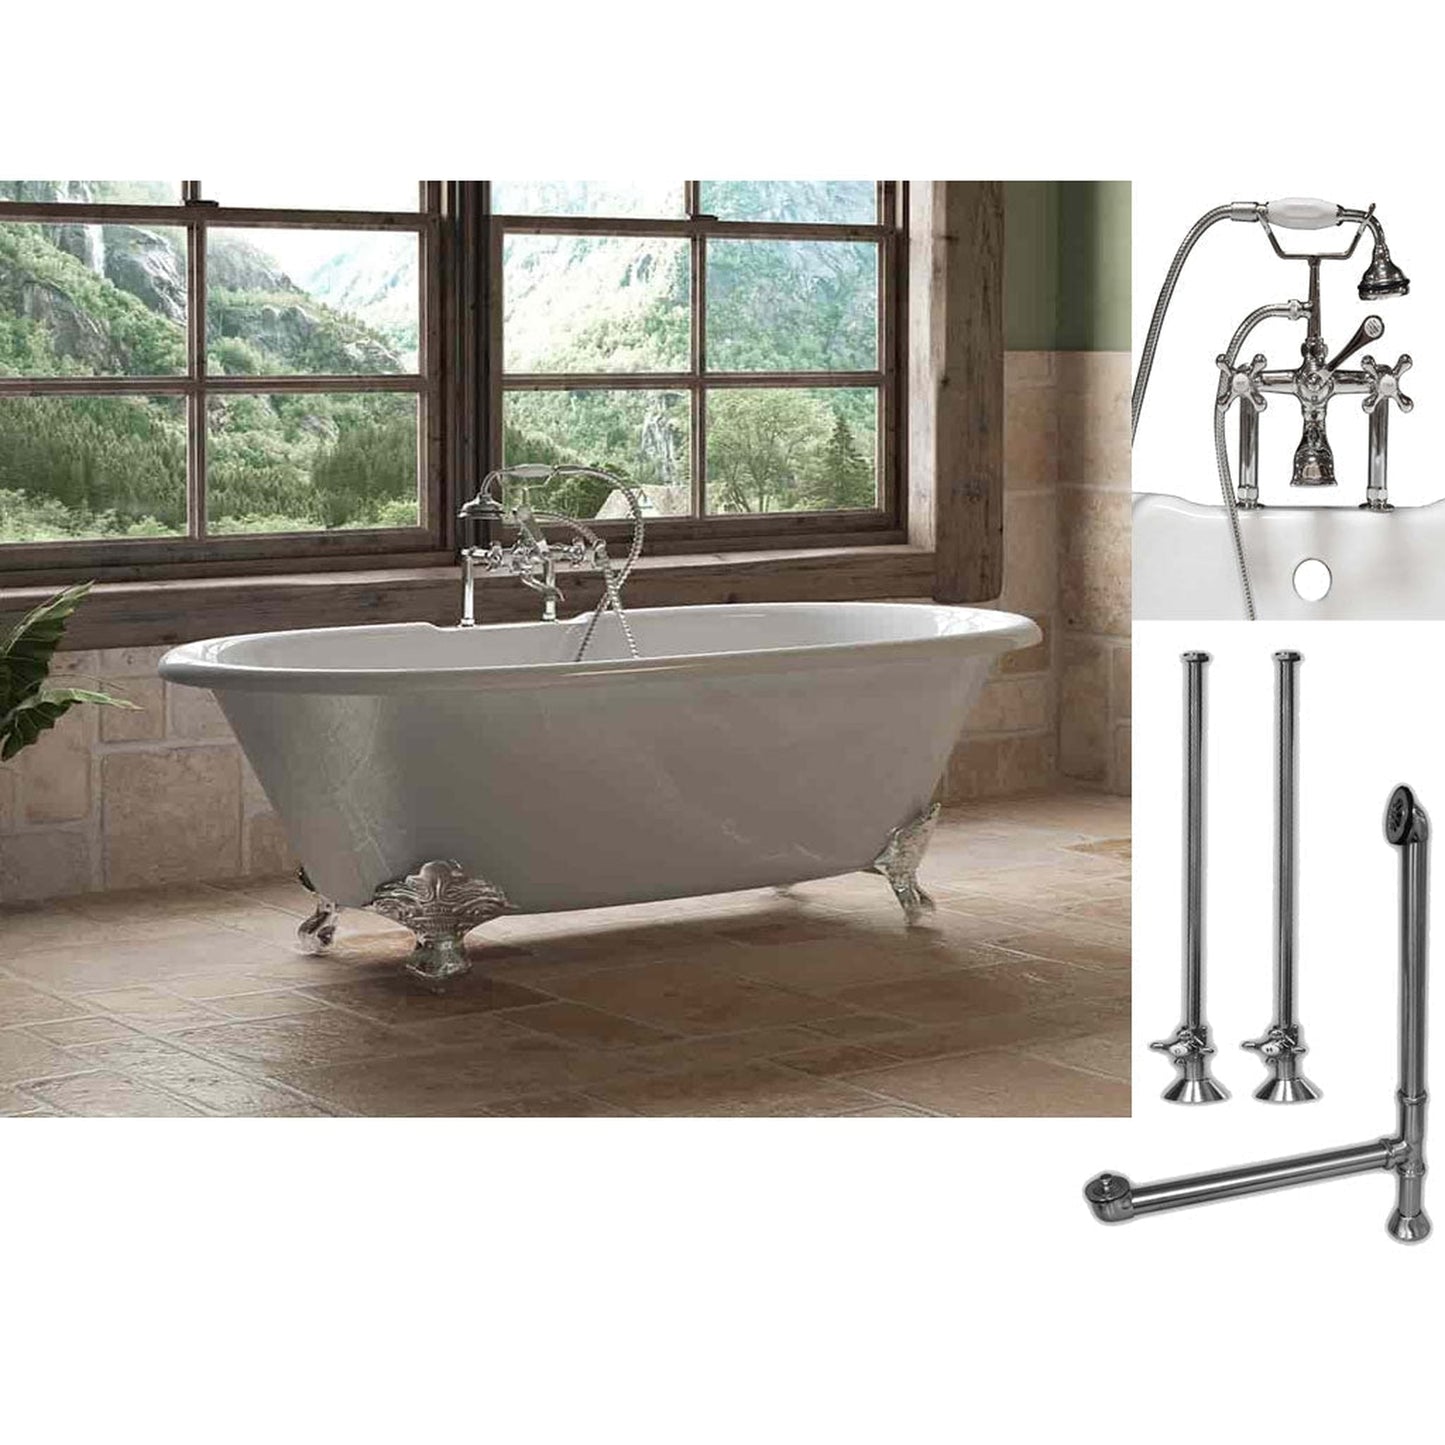 Cambridge Plumbing 67" White Cast Iron Double Ended Clawfoot Bathtub With Deck Holes And Complete Plumbing Package Including 6” Riser Deck Mount Faucet, Supply Lines, Drain And Overflow Assembly In Polished Chrome